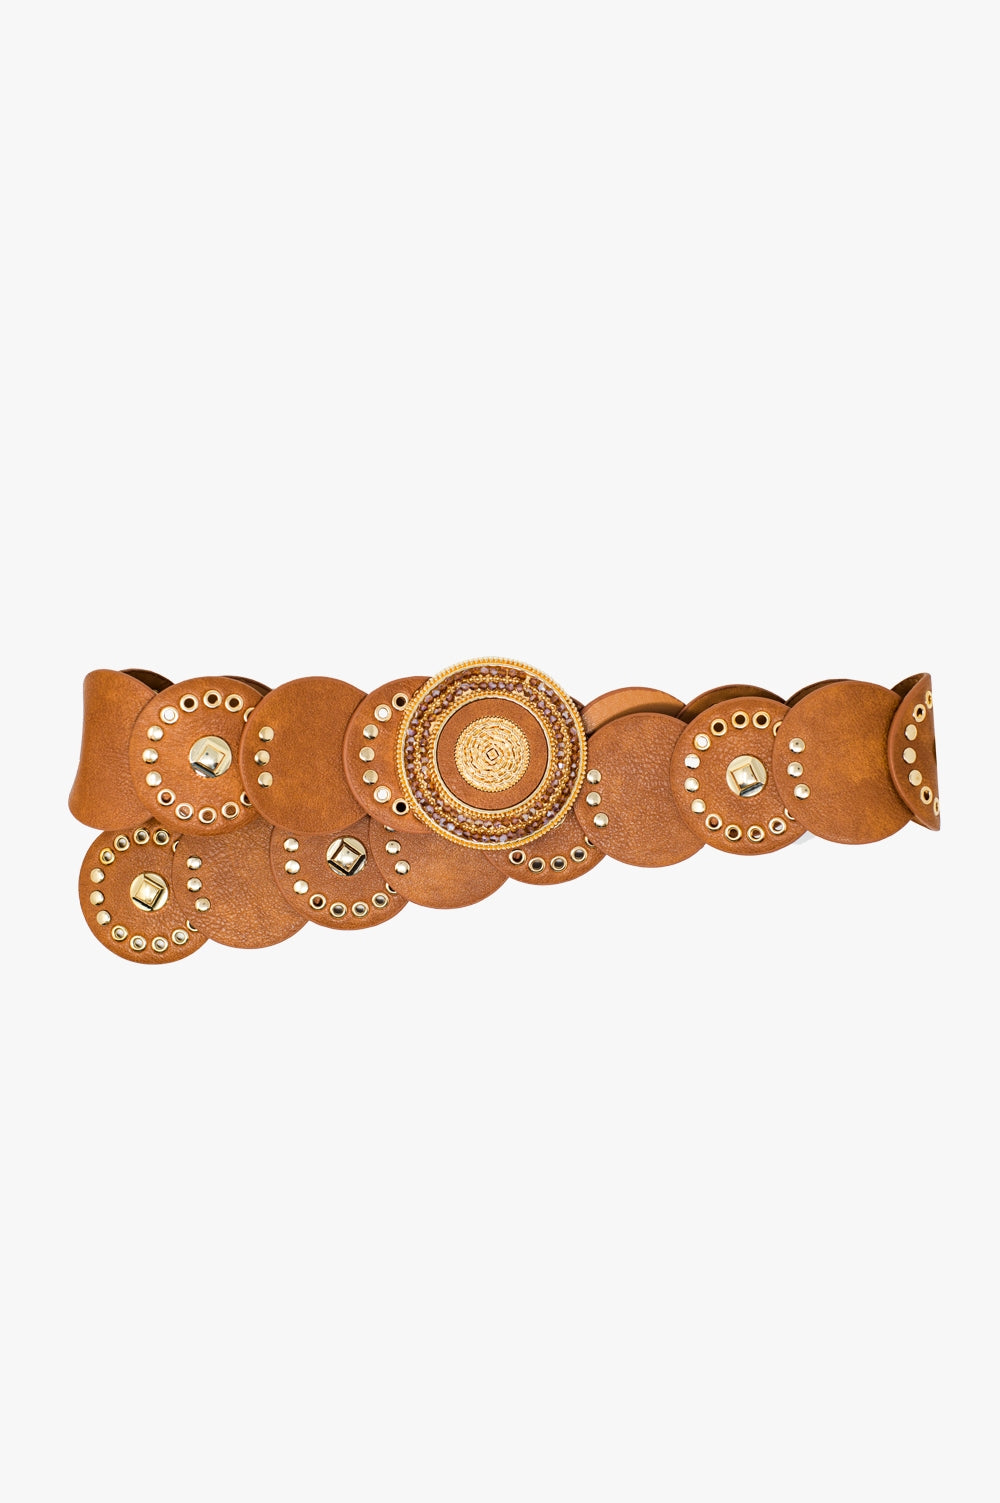 Q2 Brown leather belt with gold rhinestone round buckle and golden details